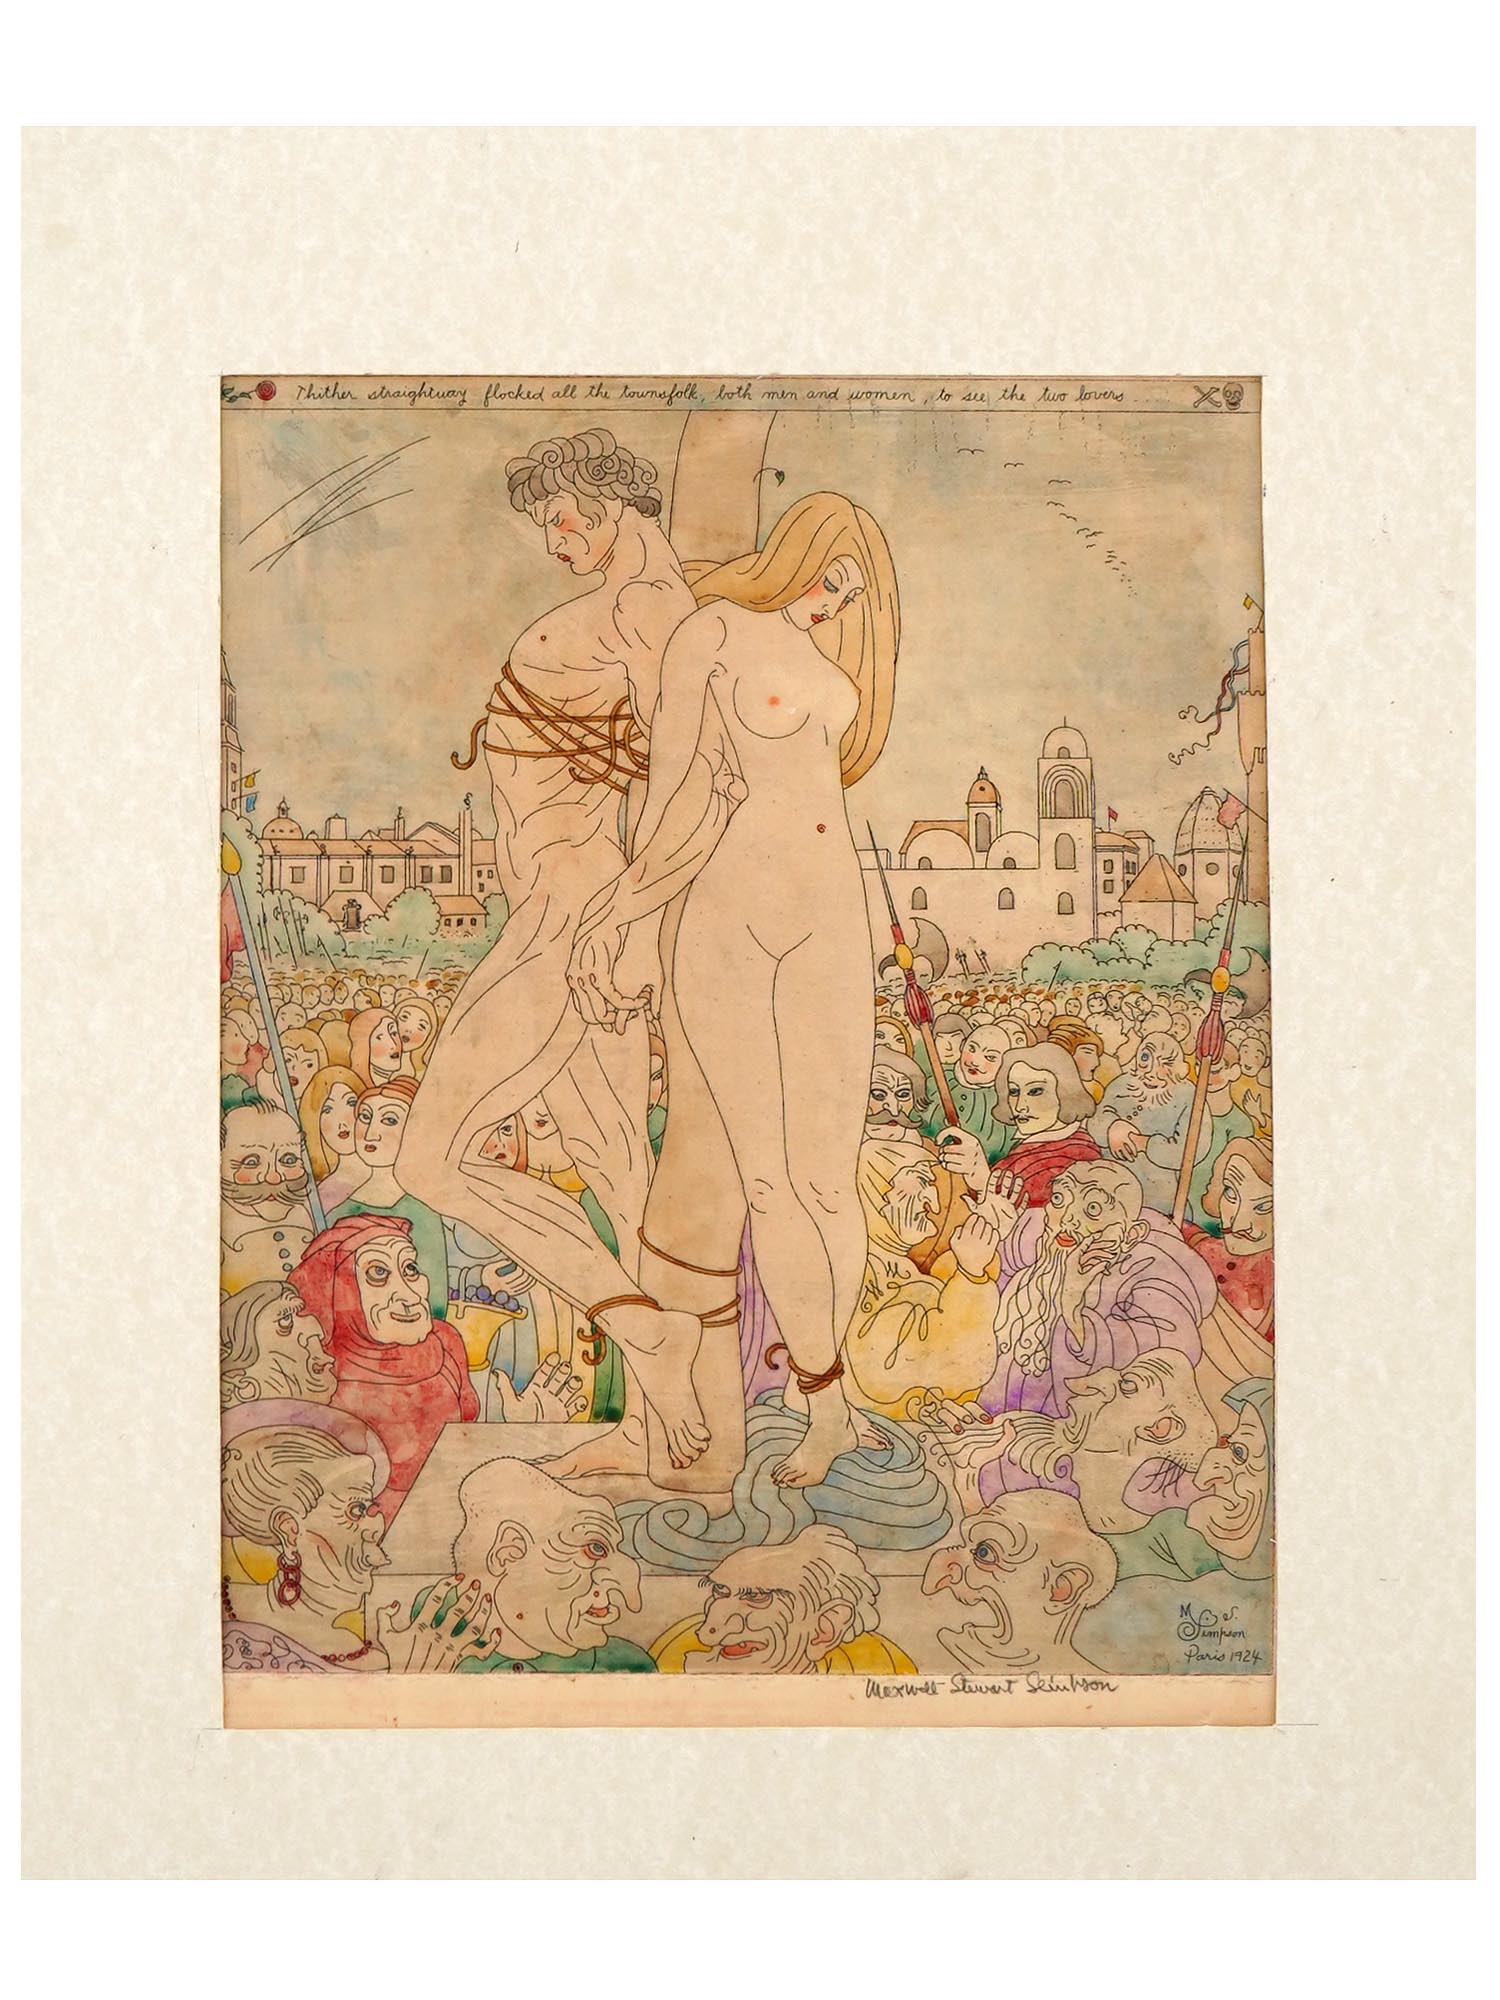 AMERICAN ETCHING TWO LOVERS BY MAXWELL STEWART SIMPSON PIC-0